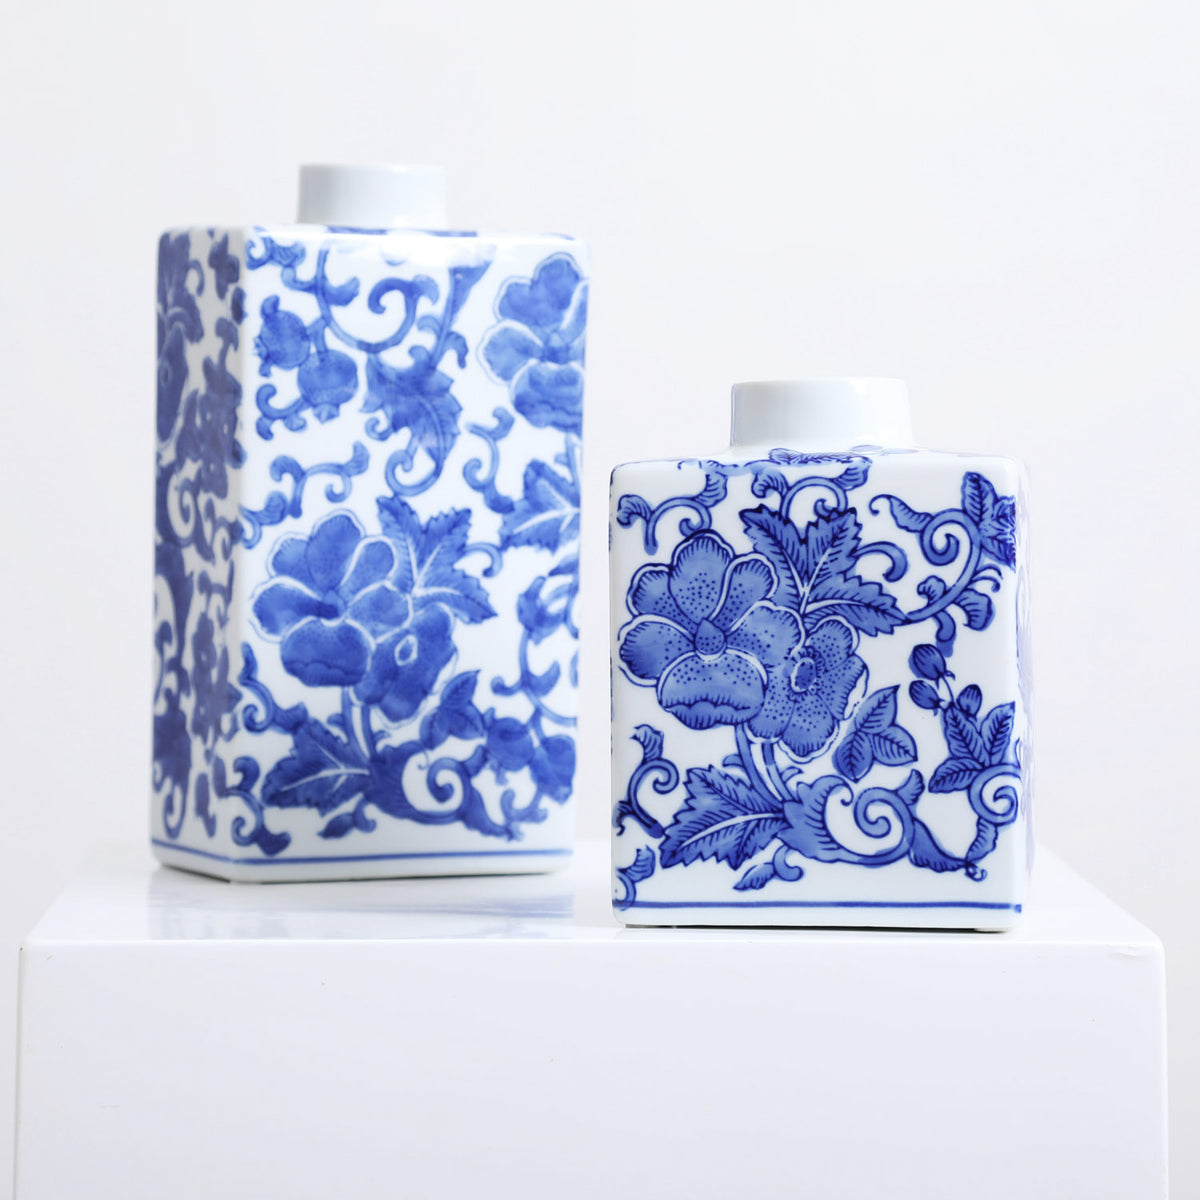 Blue & White Floral Chinoiserie Porcelain Decor Vase - Available in 2 # ...